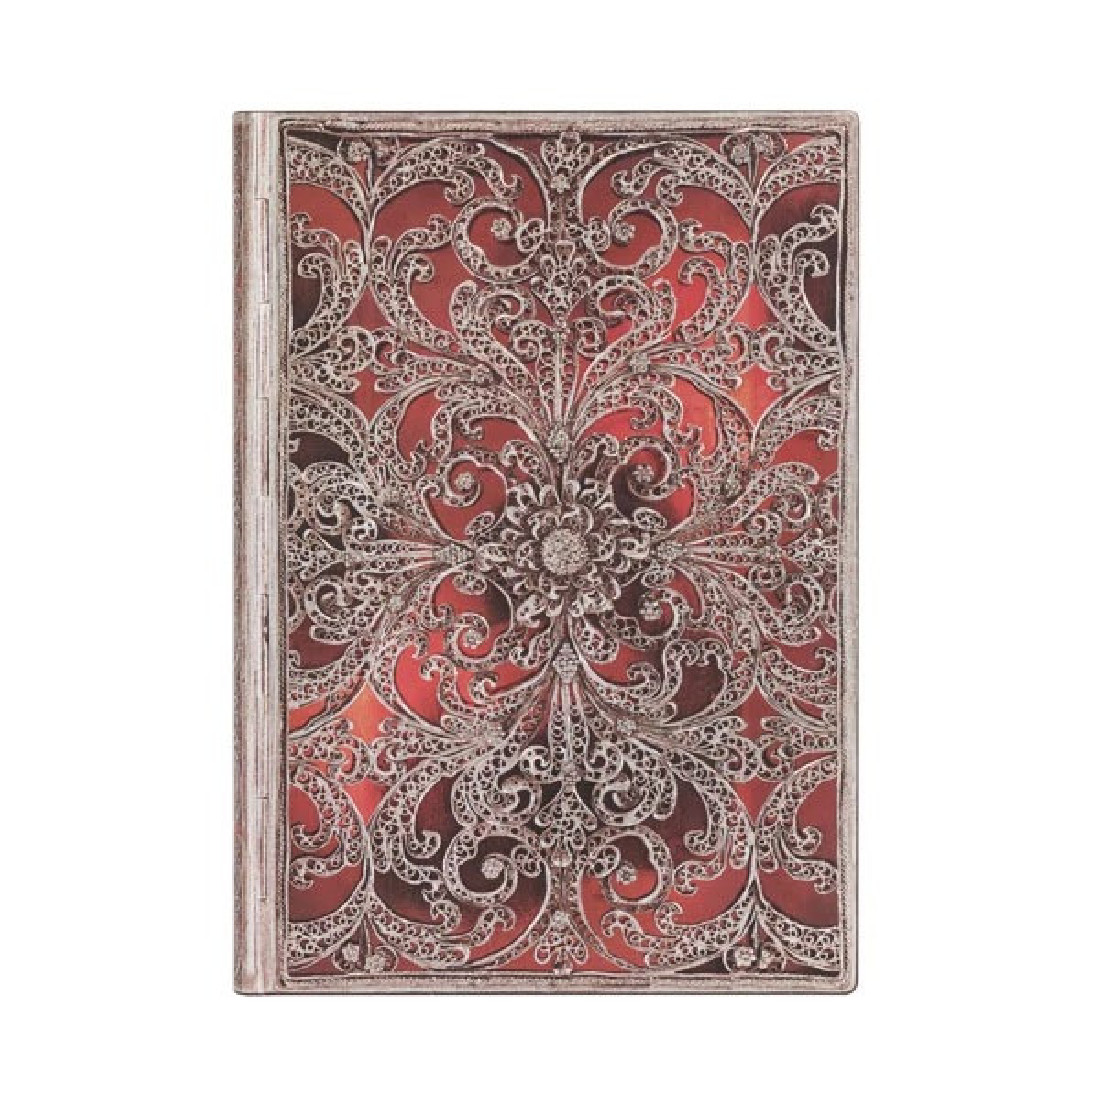 Paperblanks notebook, softcover, flexi, silver filigree collection, Ganrt, midi 13x17cm, 176 pages, lined, 100g